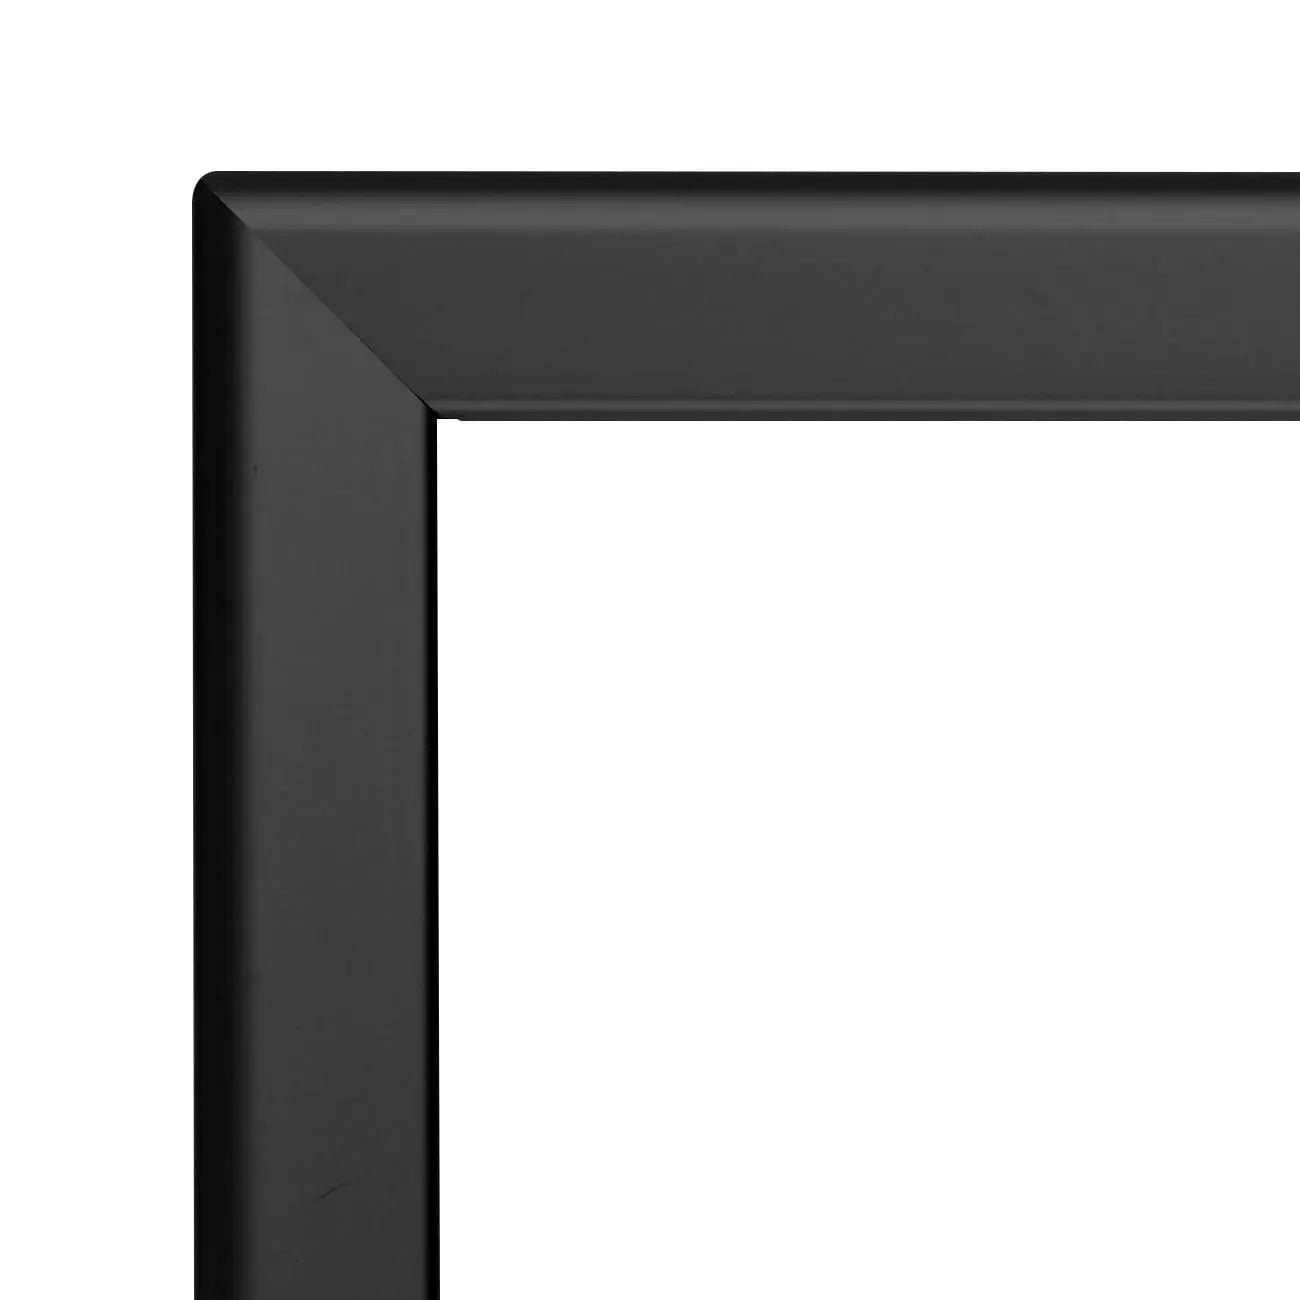 27x41 Black SnapeZo® Double-Sided - 1.25" Profile - Snap Frames Direct